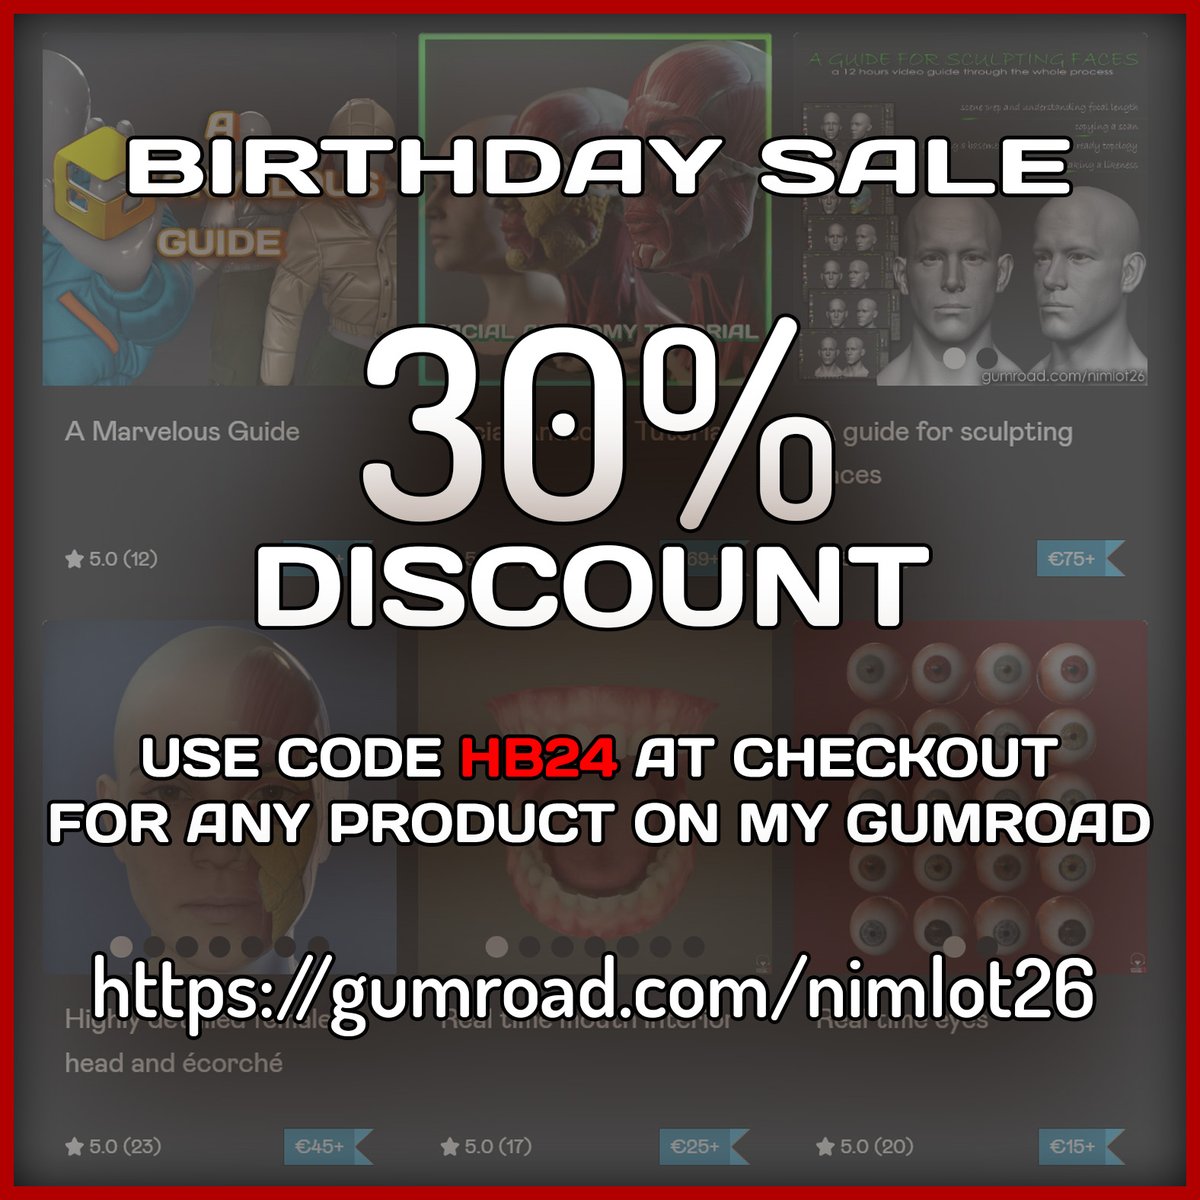 Since tomorrow is my birthday I'll give you a hefty discount on my gumroad stuff(available till monday). Use code HB24 at checkout for 30% off. nimlot26.gumroad.com